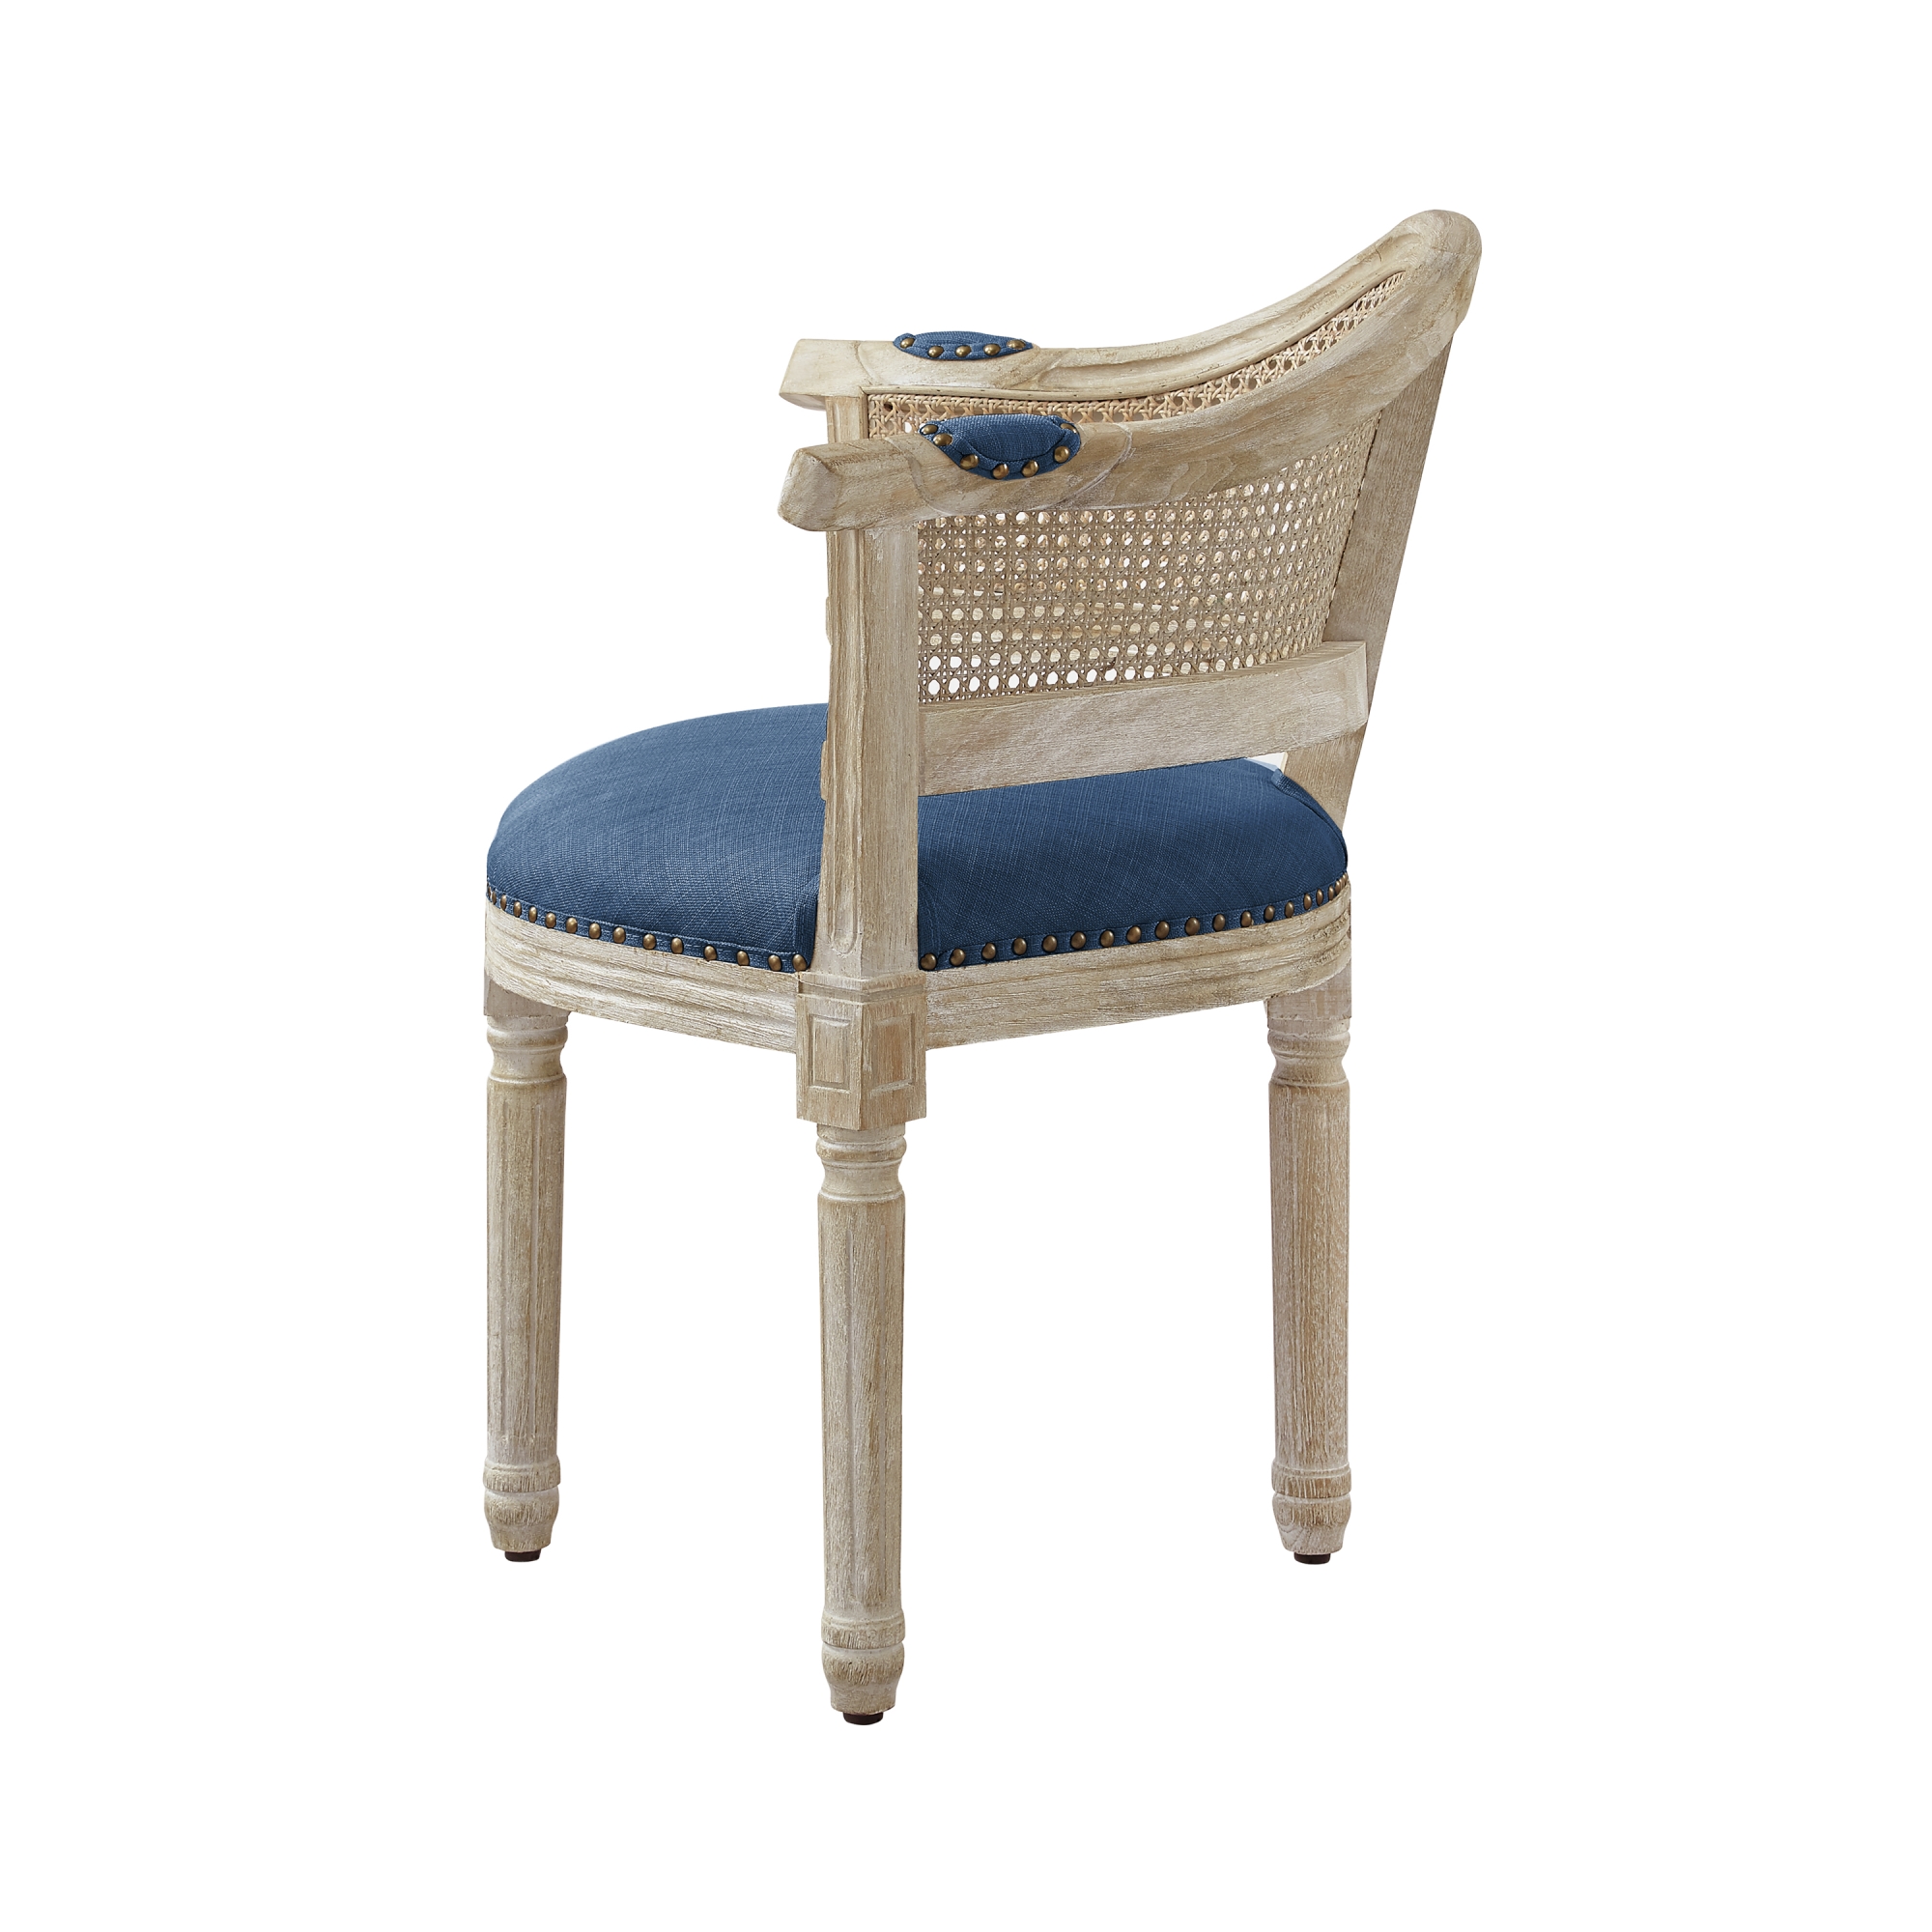 Rustic Manor Edmond Accent Chair Upholstered, Nailhead Trim Rattan Imitation, Curved Back Antique Brushed Wood Finish